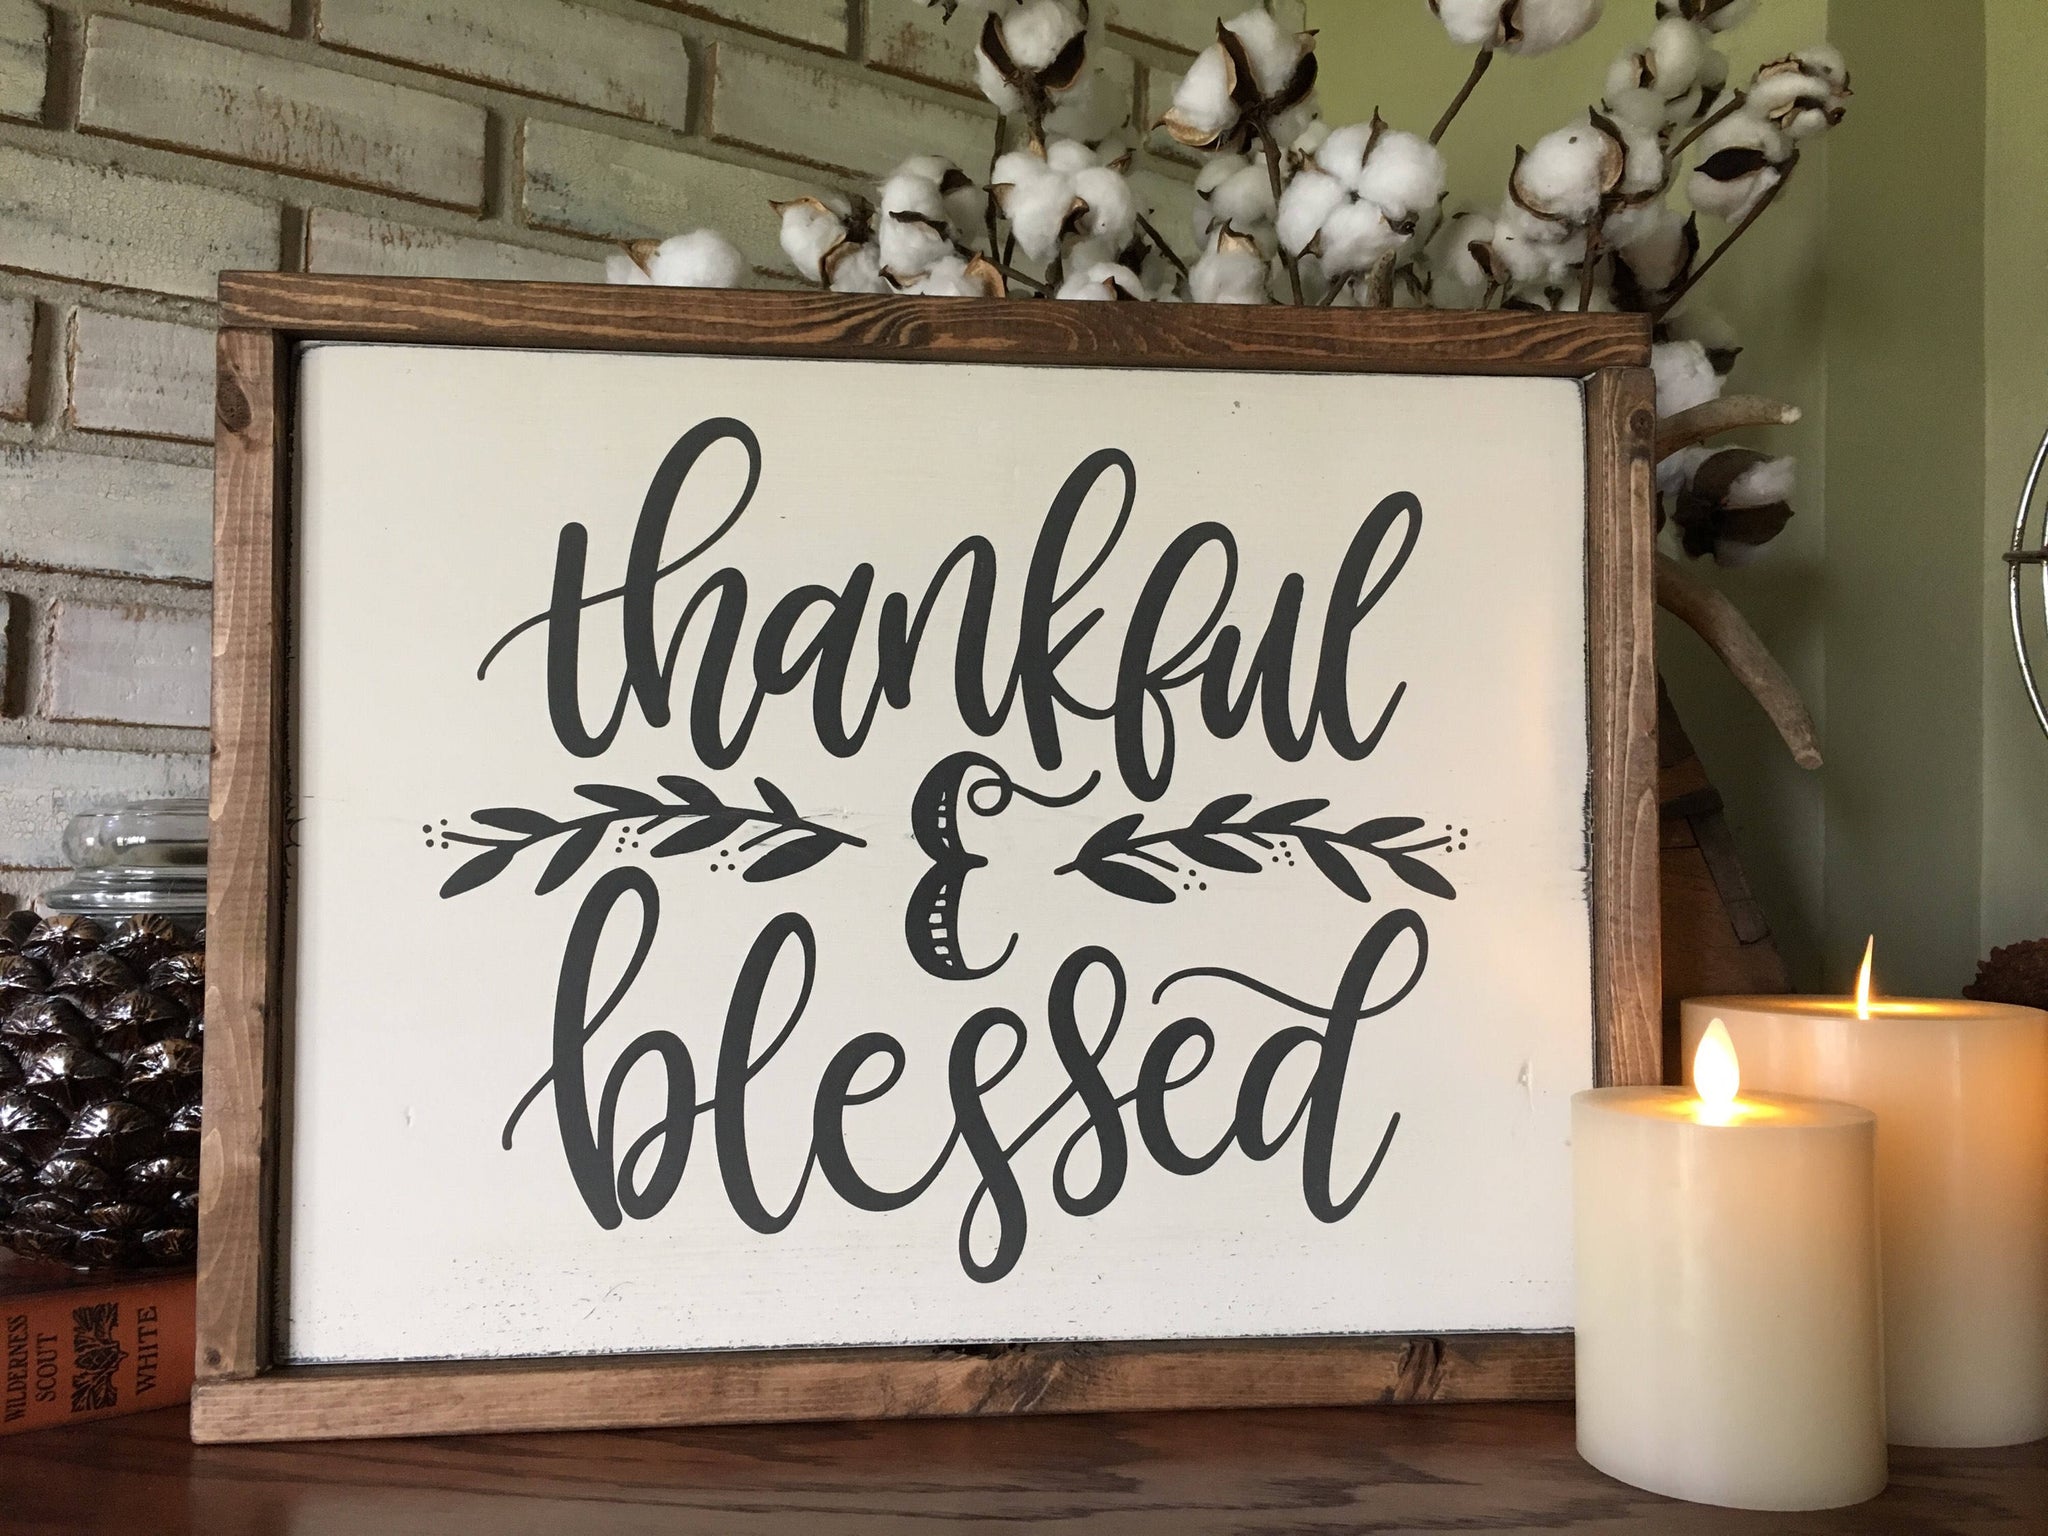 Thankful and Blessed Wood Sign - Farmhouse style - Home Decor - Rustic